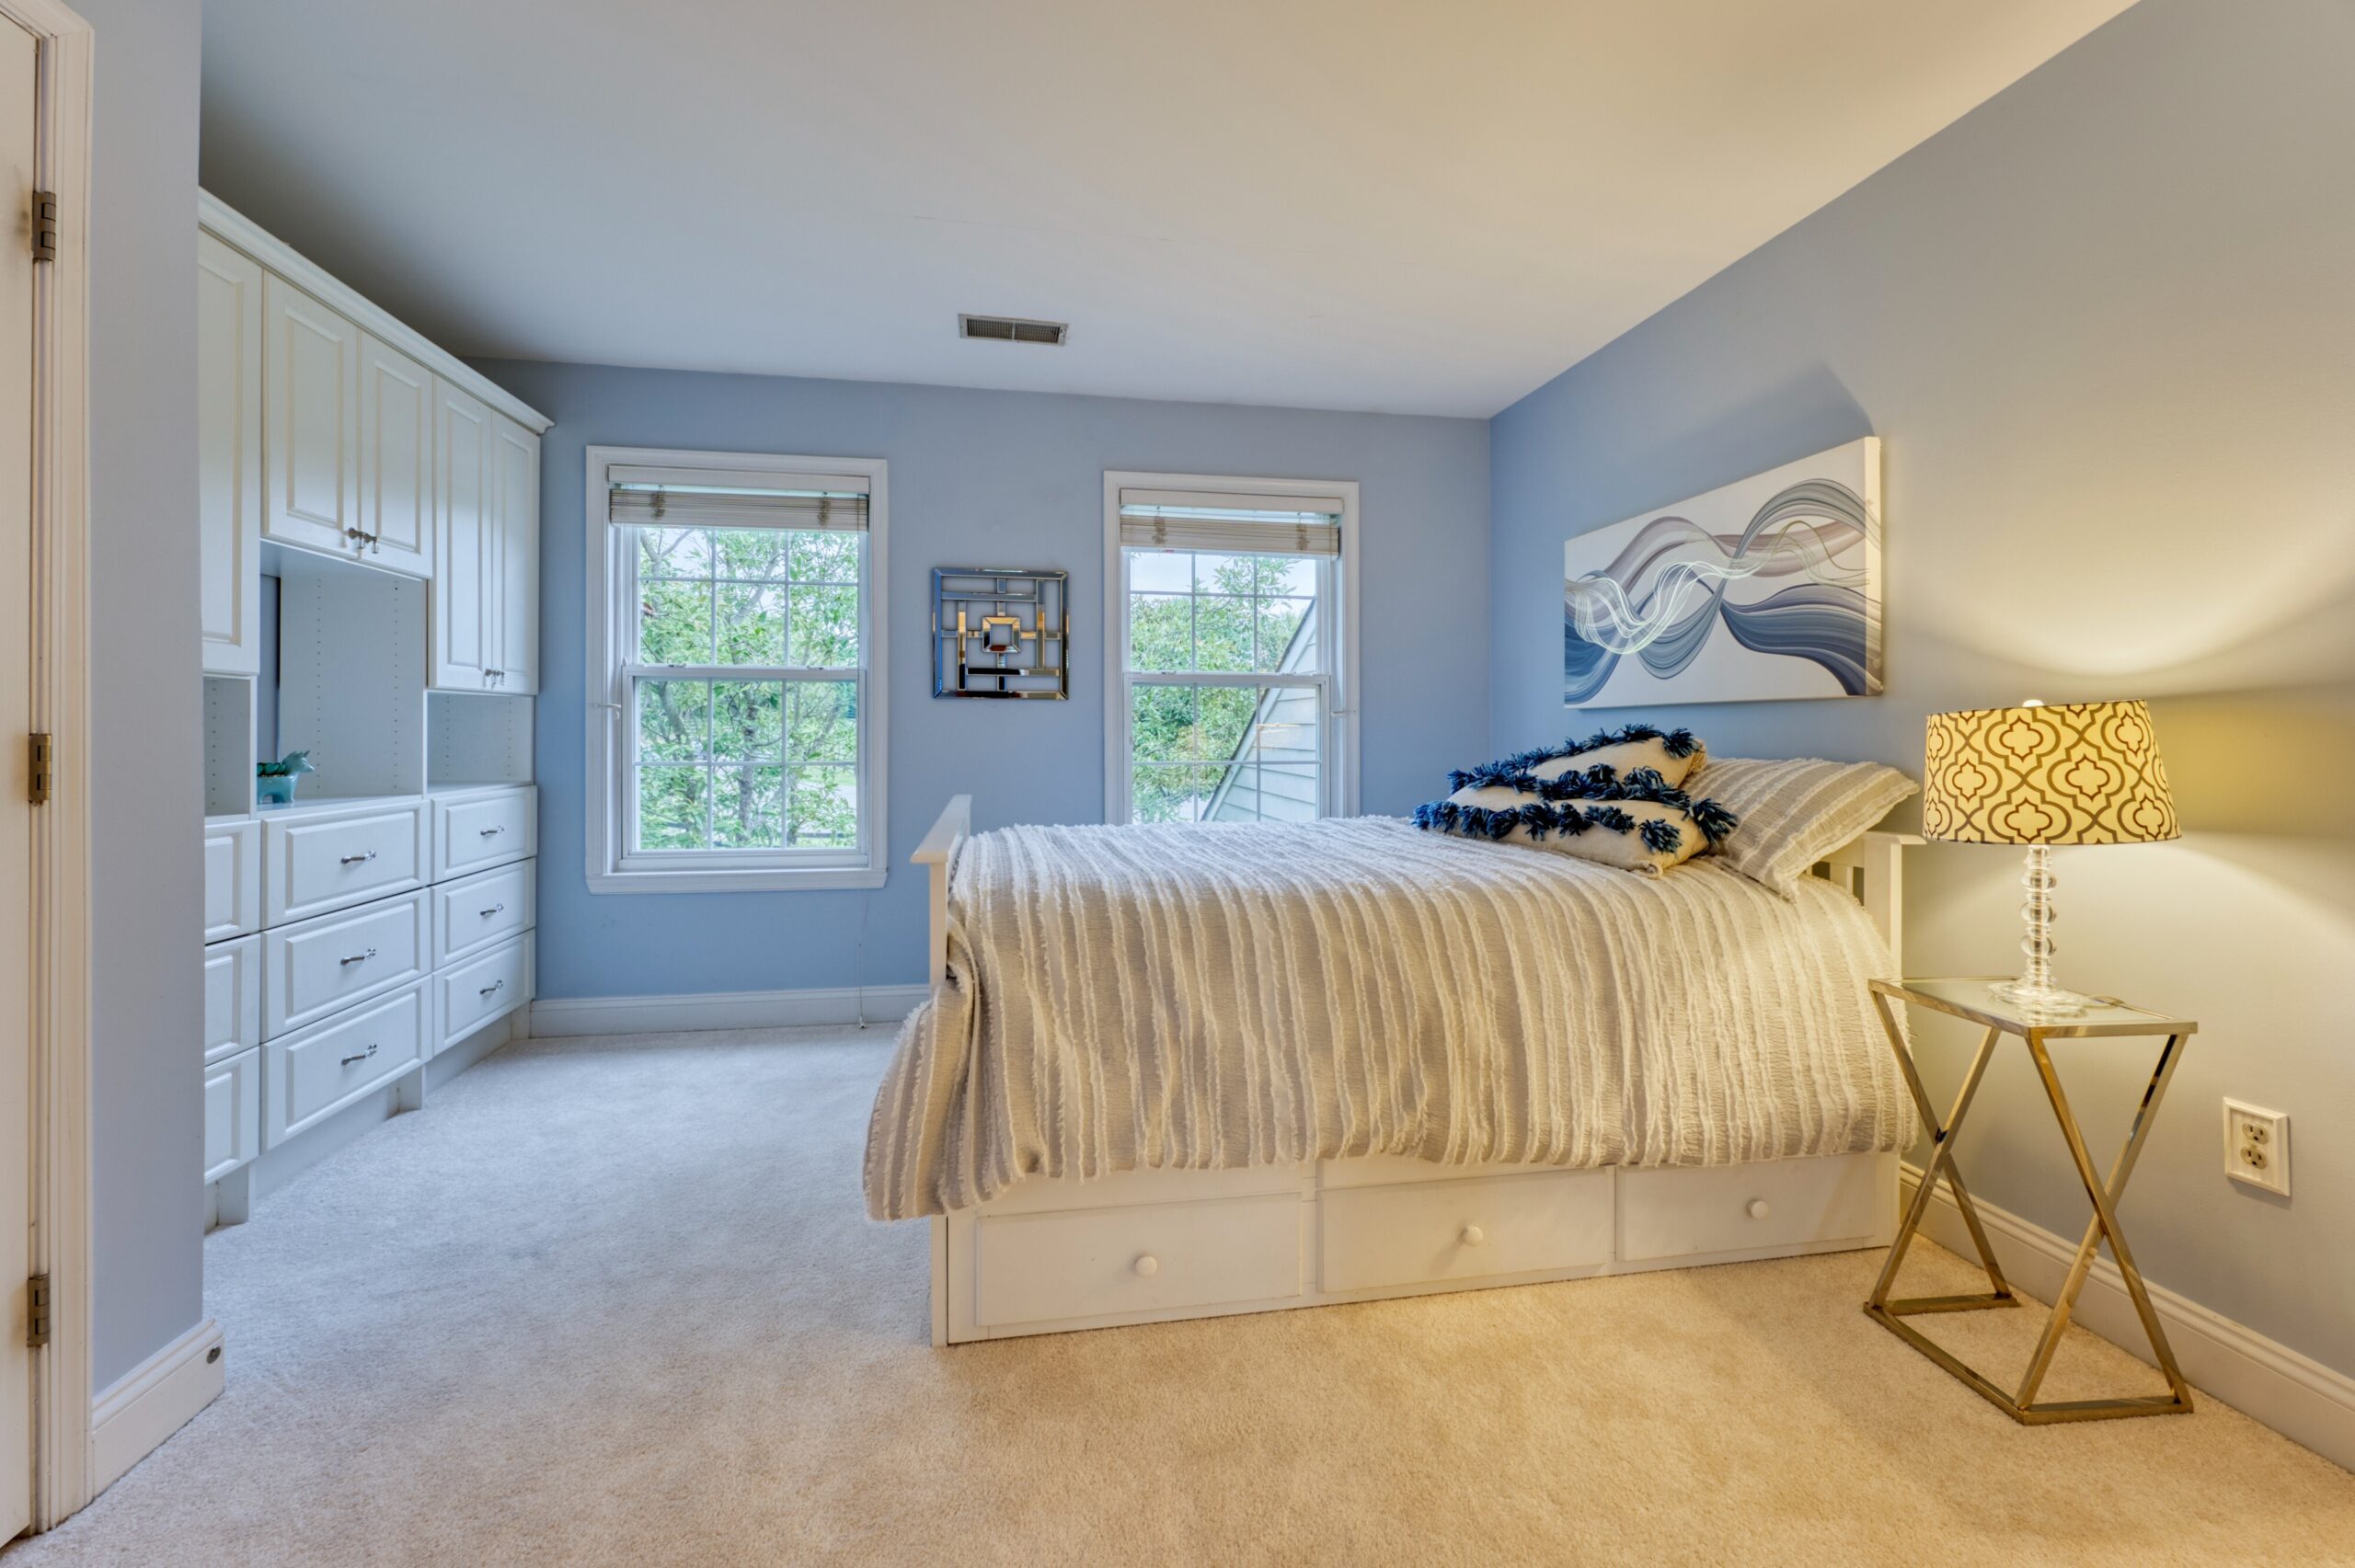 Professional interior photo of 16961 Heather Knolls Pl - showing a secondary bedroom with built-in cabinets and storage